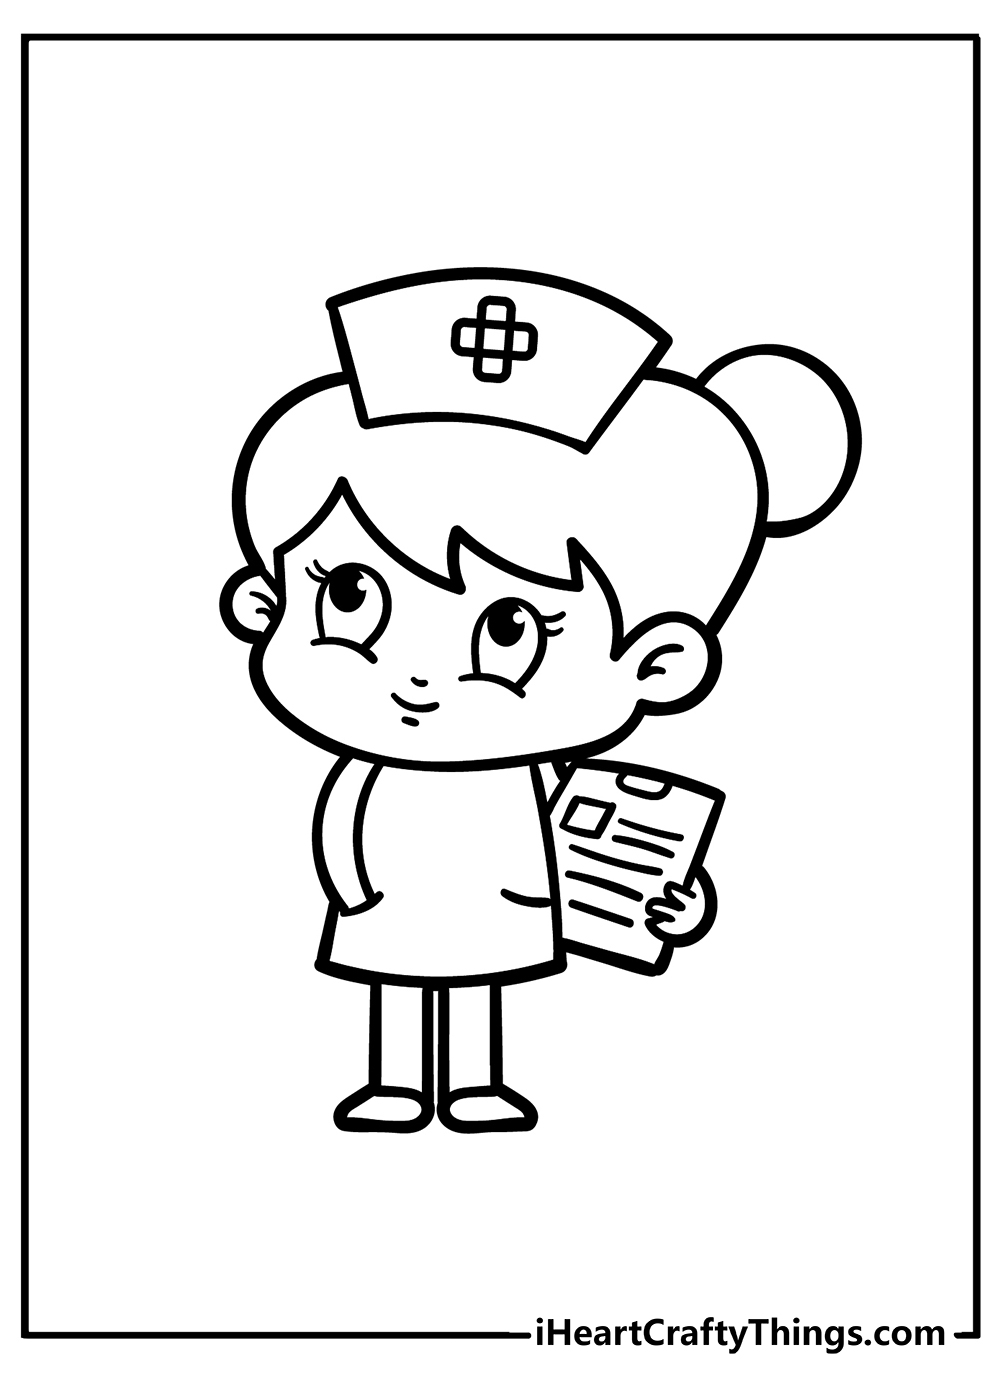 Nurse Coloring Book for adults free download